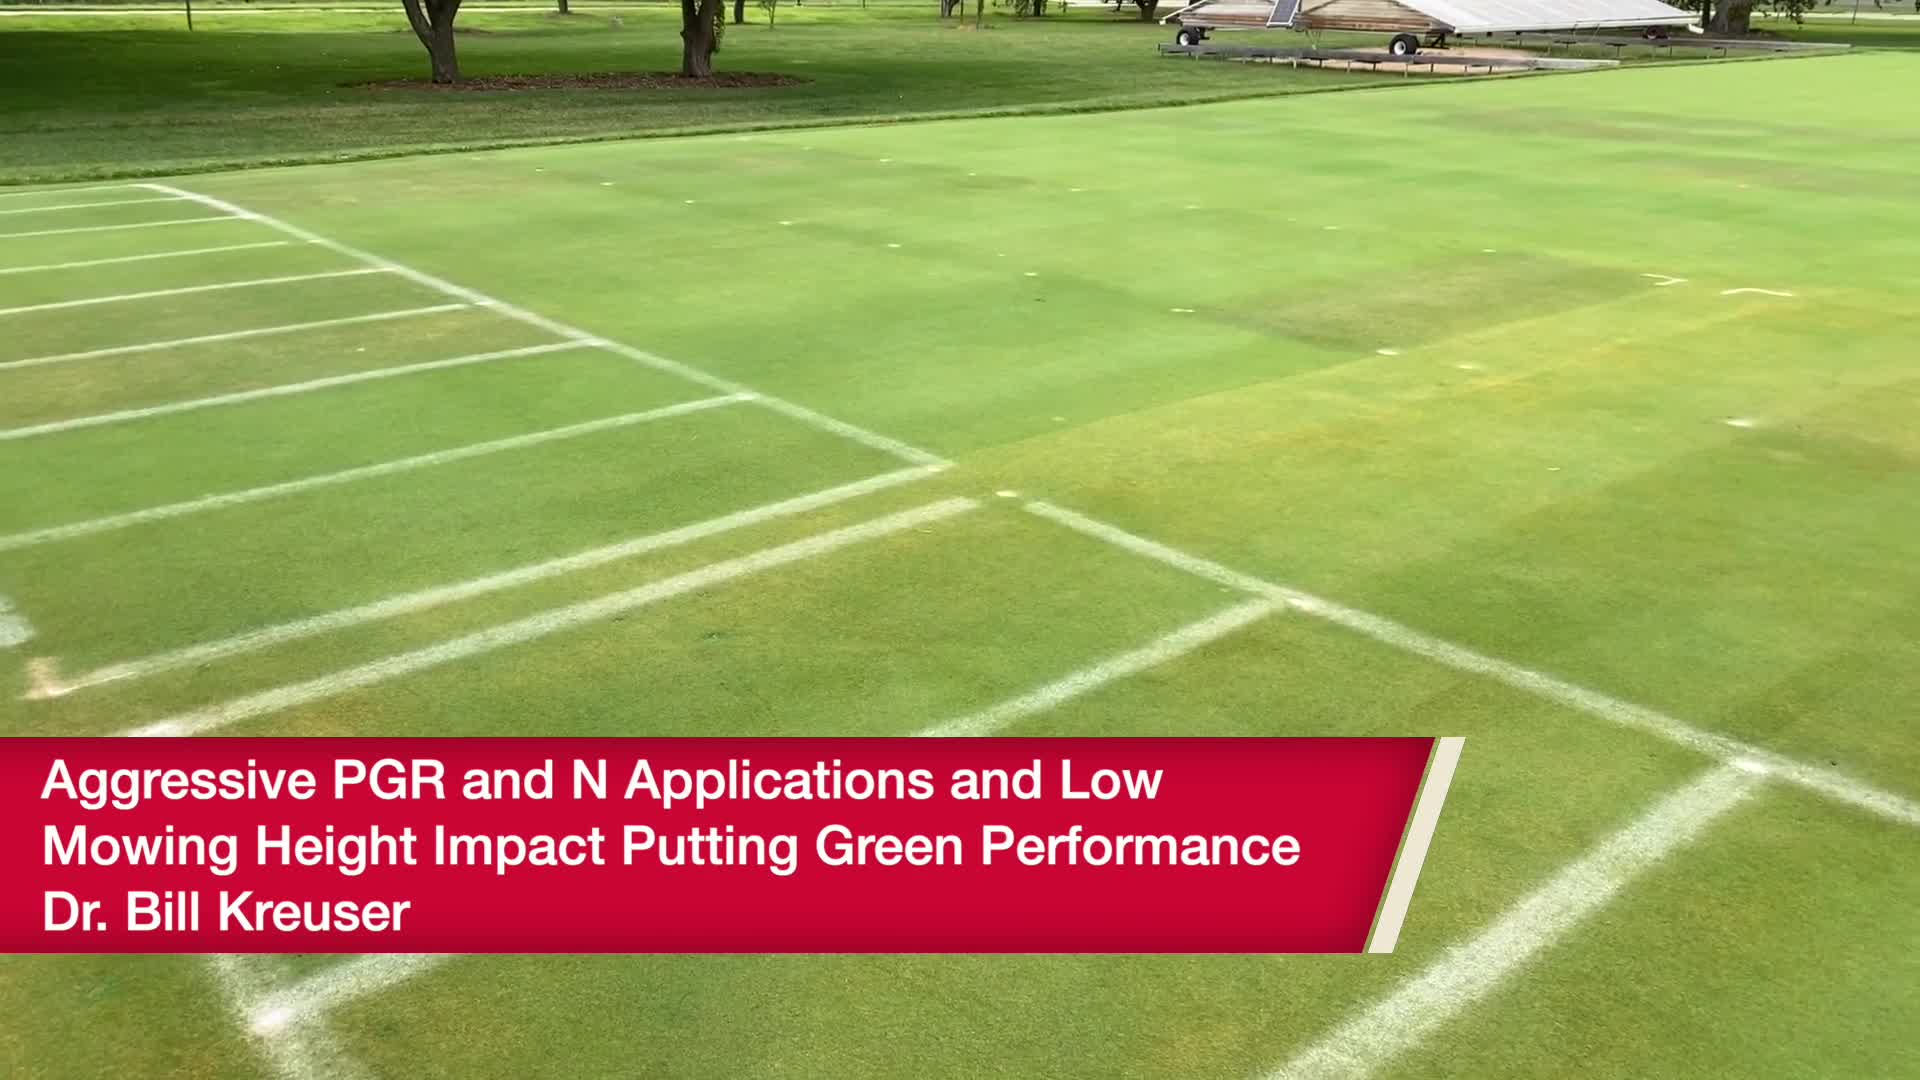 Aggressive PGR and N applications and low mowing height impact putting green performance